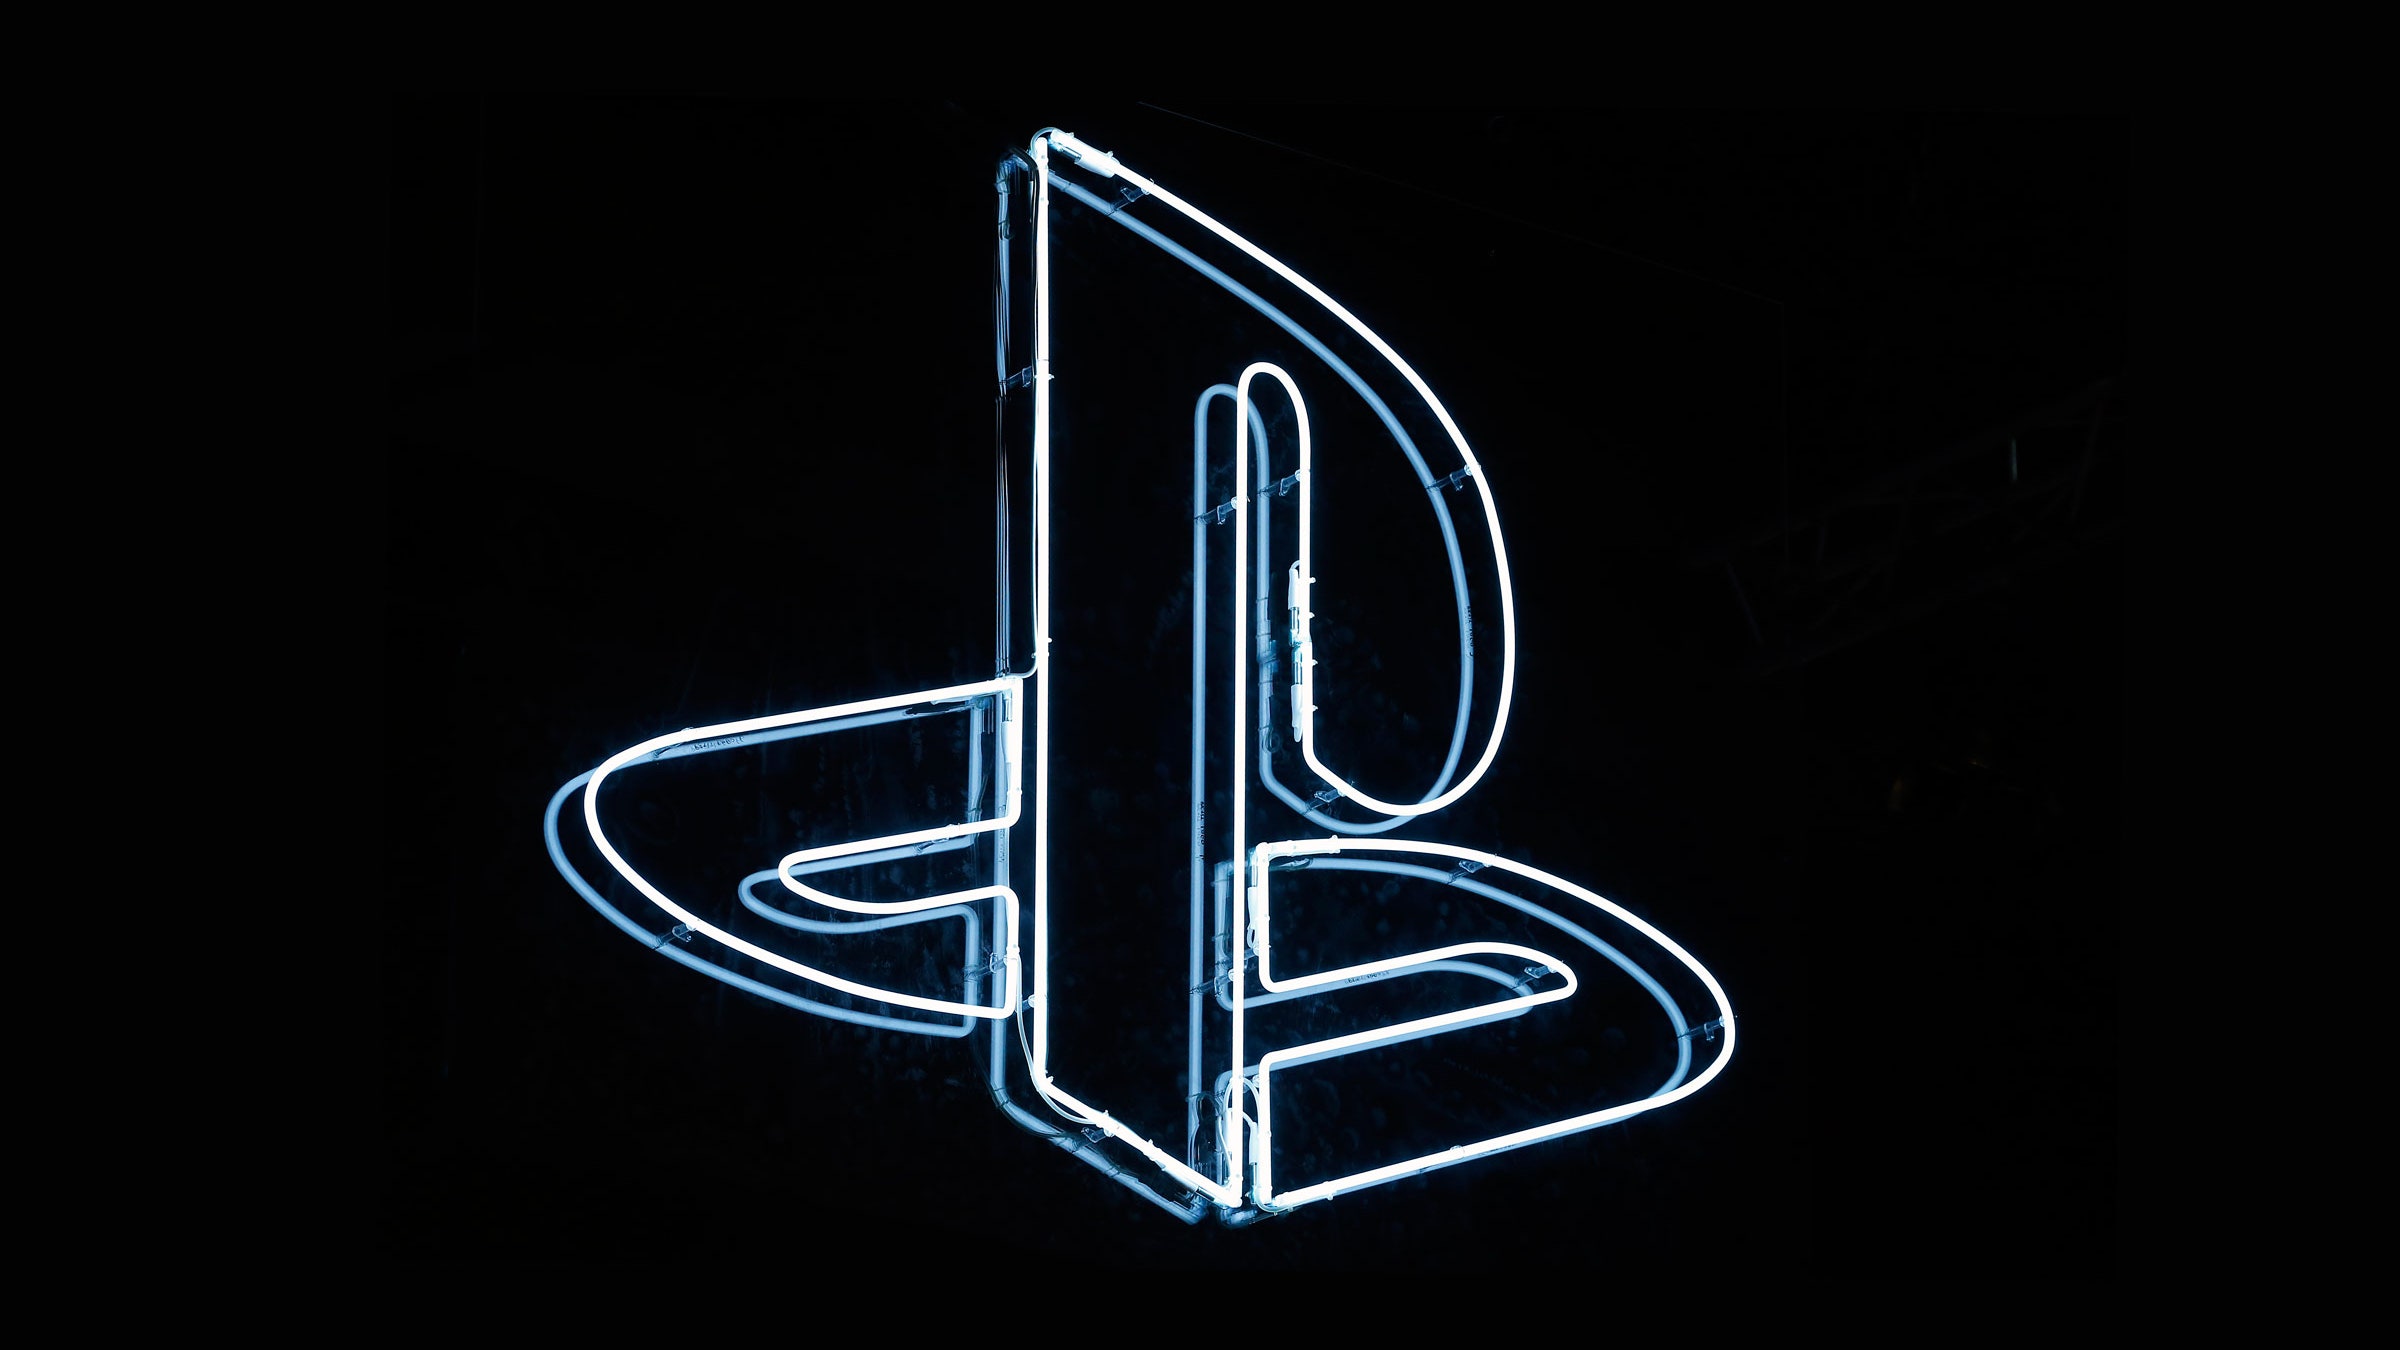 Exclusive: What To Expect From Sony's Next Gen PlayStation